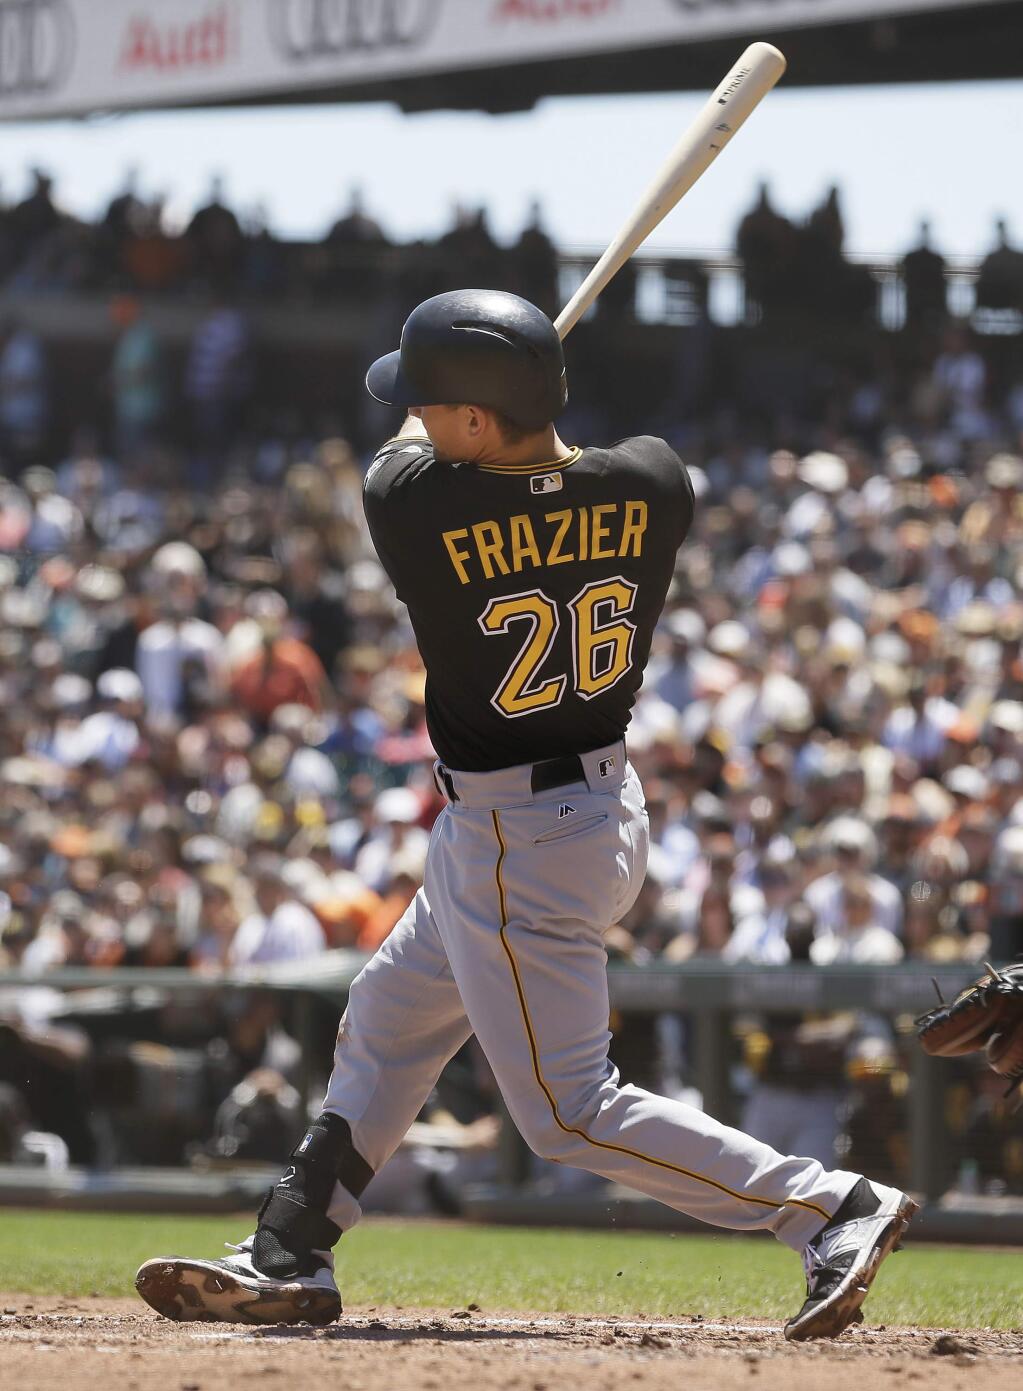 Pittsburgh Pirates' Adam Frazier hits an RBI double to deep right field off San Francisco Giants starting pitcher Jeff Samardzija in the second inning of a baseball game Wednesday, July 26, 2017, in San Francisco. (AP Photo/Eric Risberg)